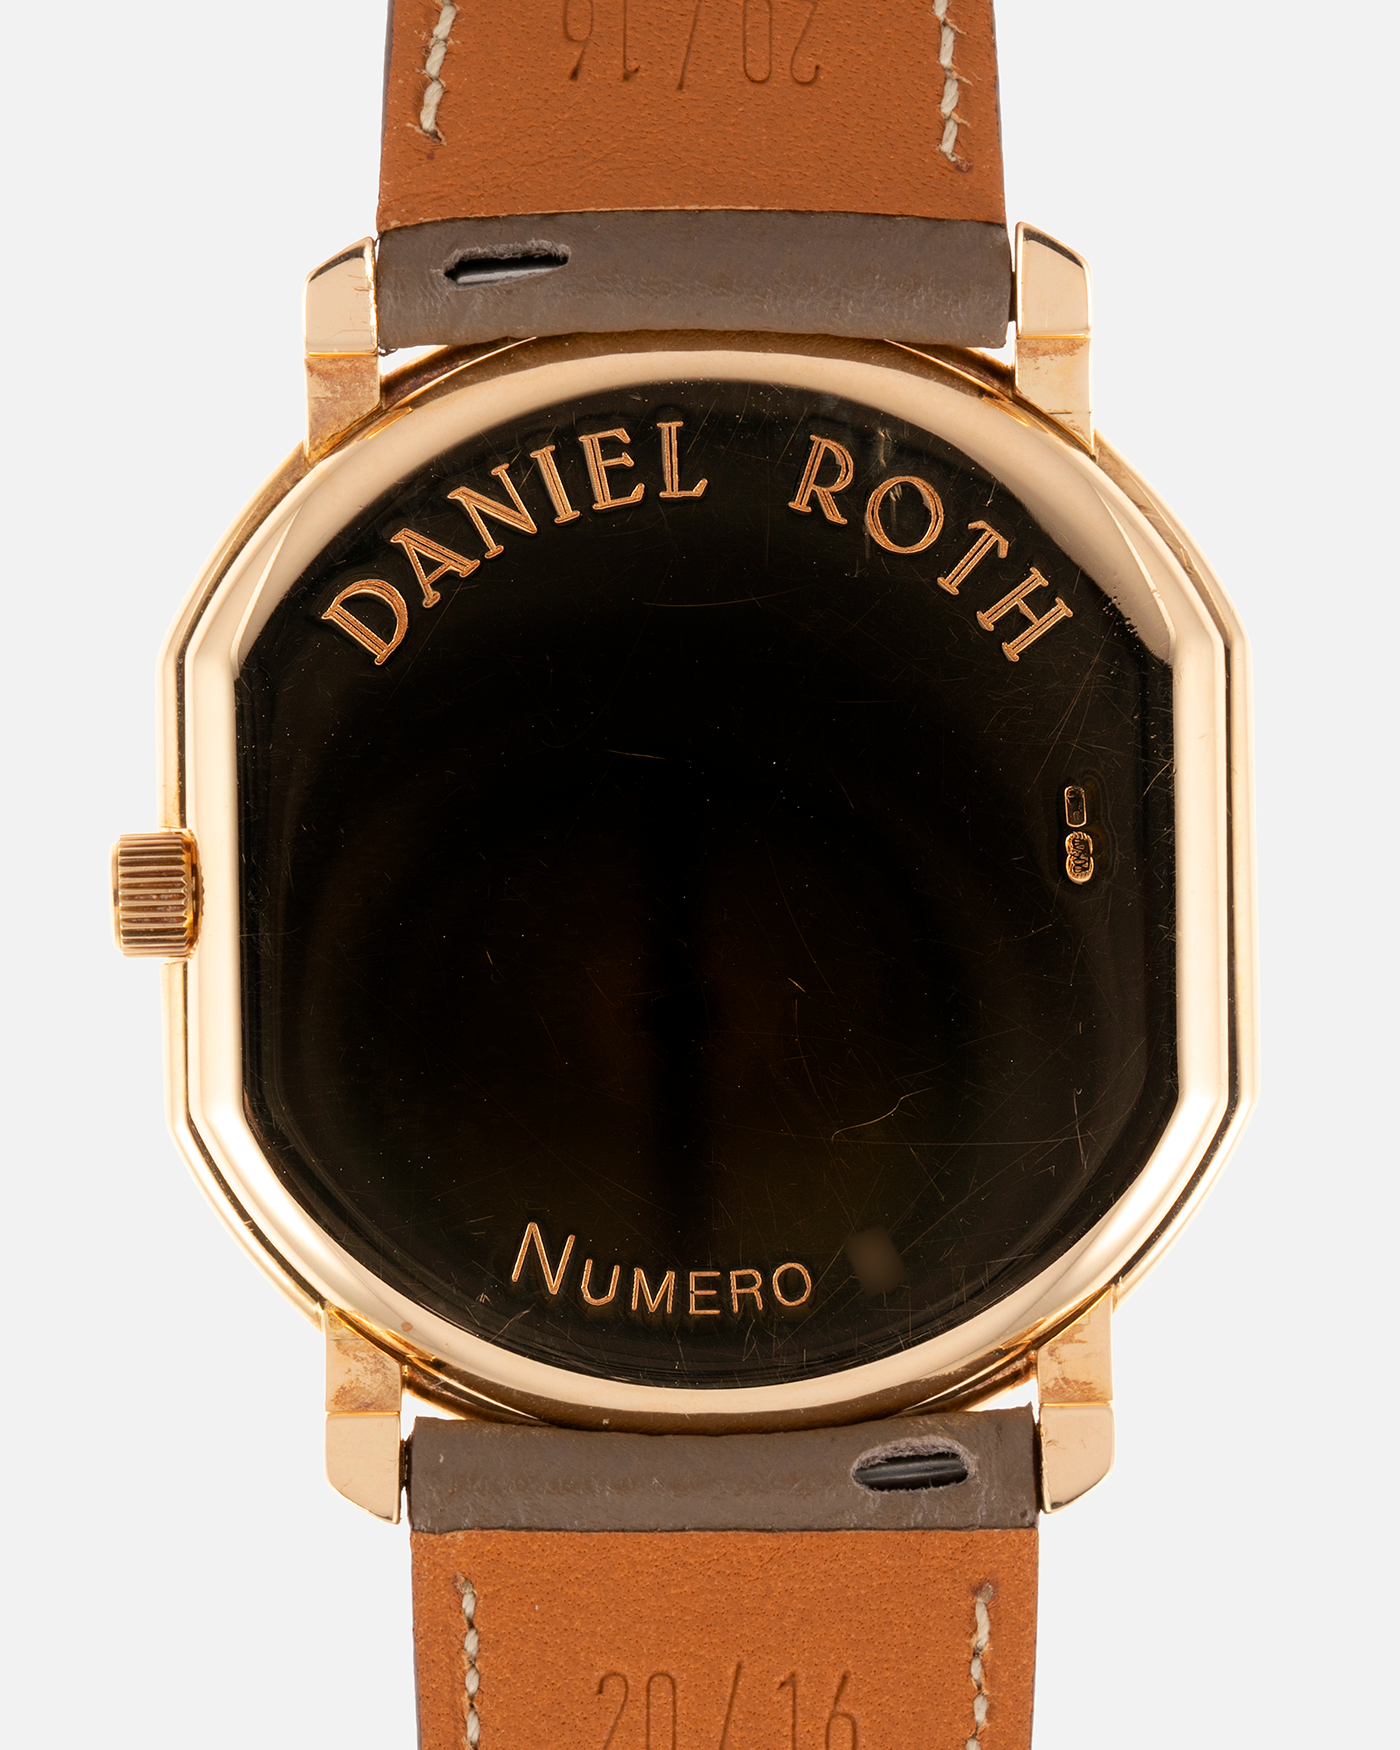 Brand: Daniel Roth Year: 1990’s Model: 2107 Material: 18k Yellow Gold Movement: Frederic Piguet Cal. 71 Case Diameter: 35mm X 38mm Strap: Nostime Taupe Grained Calf with 18k Yellow Gold Tang Buckle